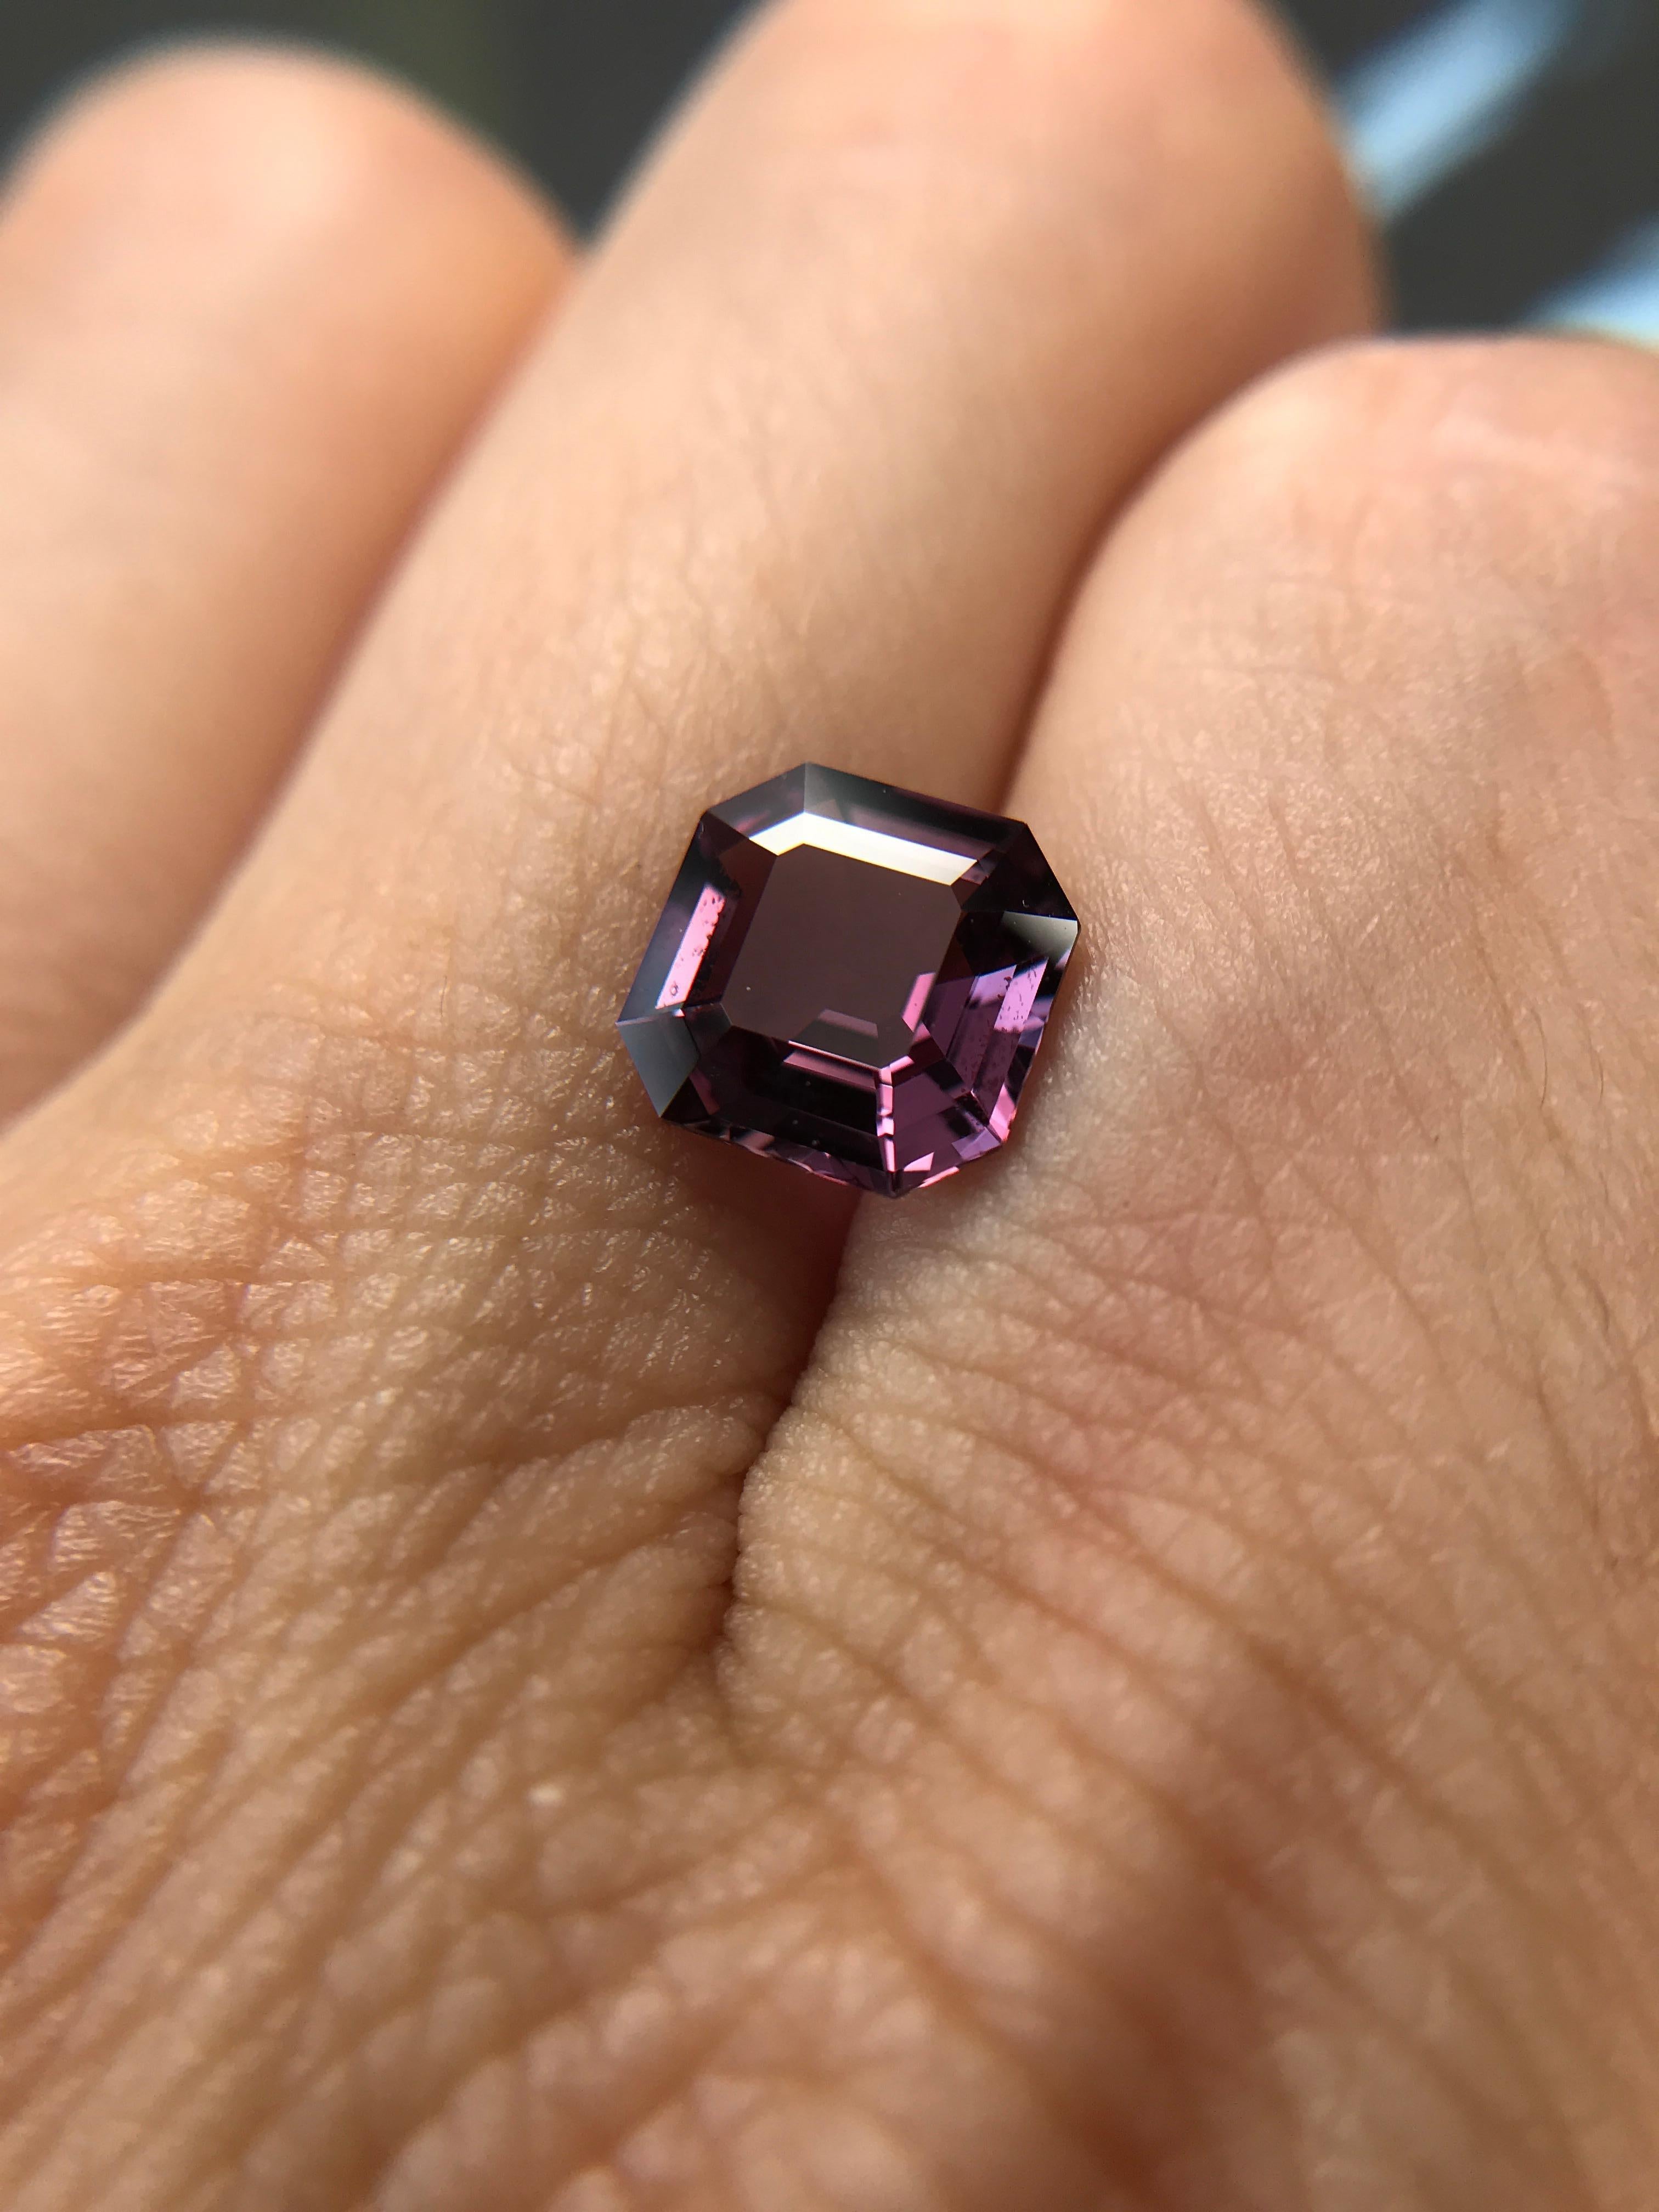 Striking 2.40 carat natural asscher cut fancy sapphire in a pinkish-purple colour. This fancy sapphire is perfect for an eye-catching pendant or stylish ring.

We specialise in colour gemstones and offer a bespoke jewellery service. The production